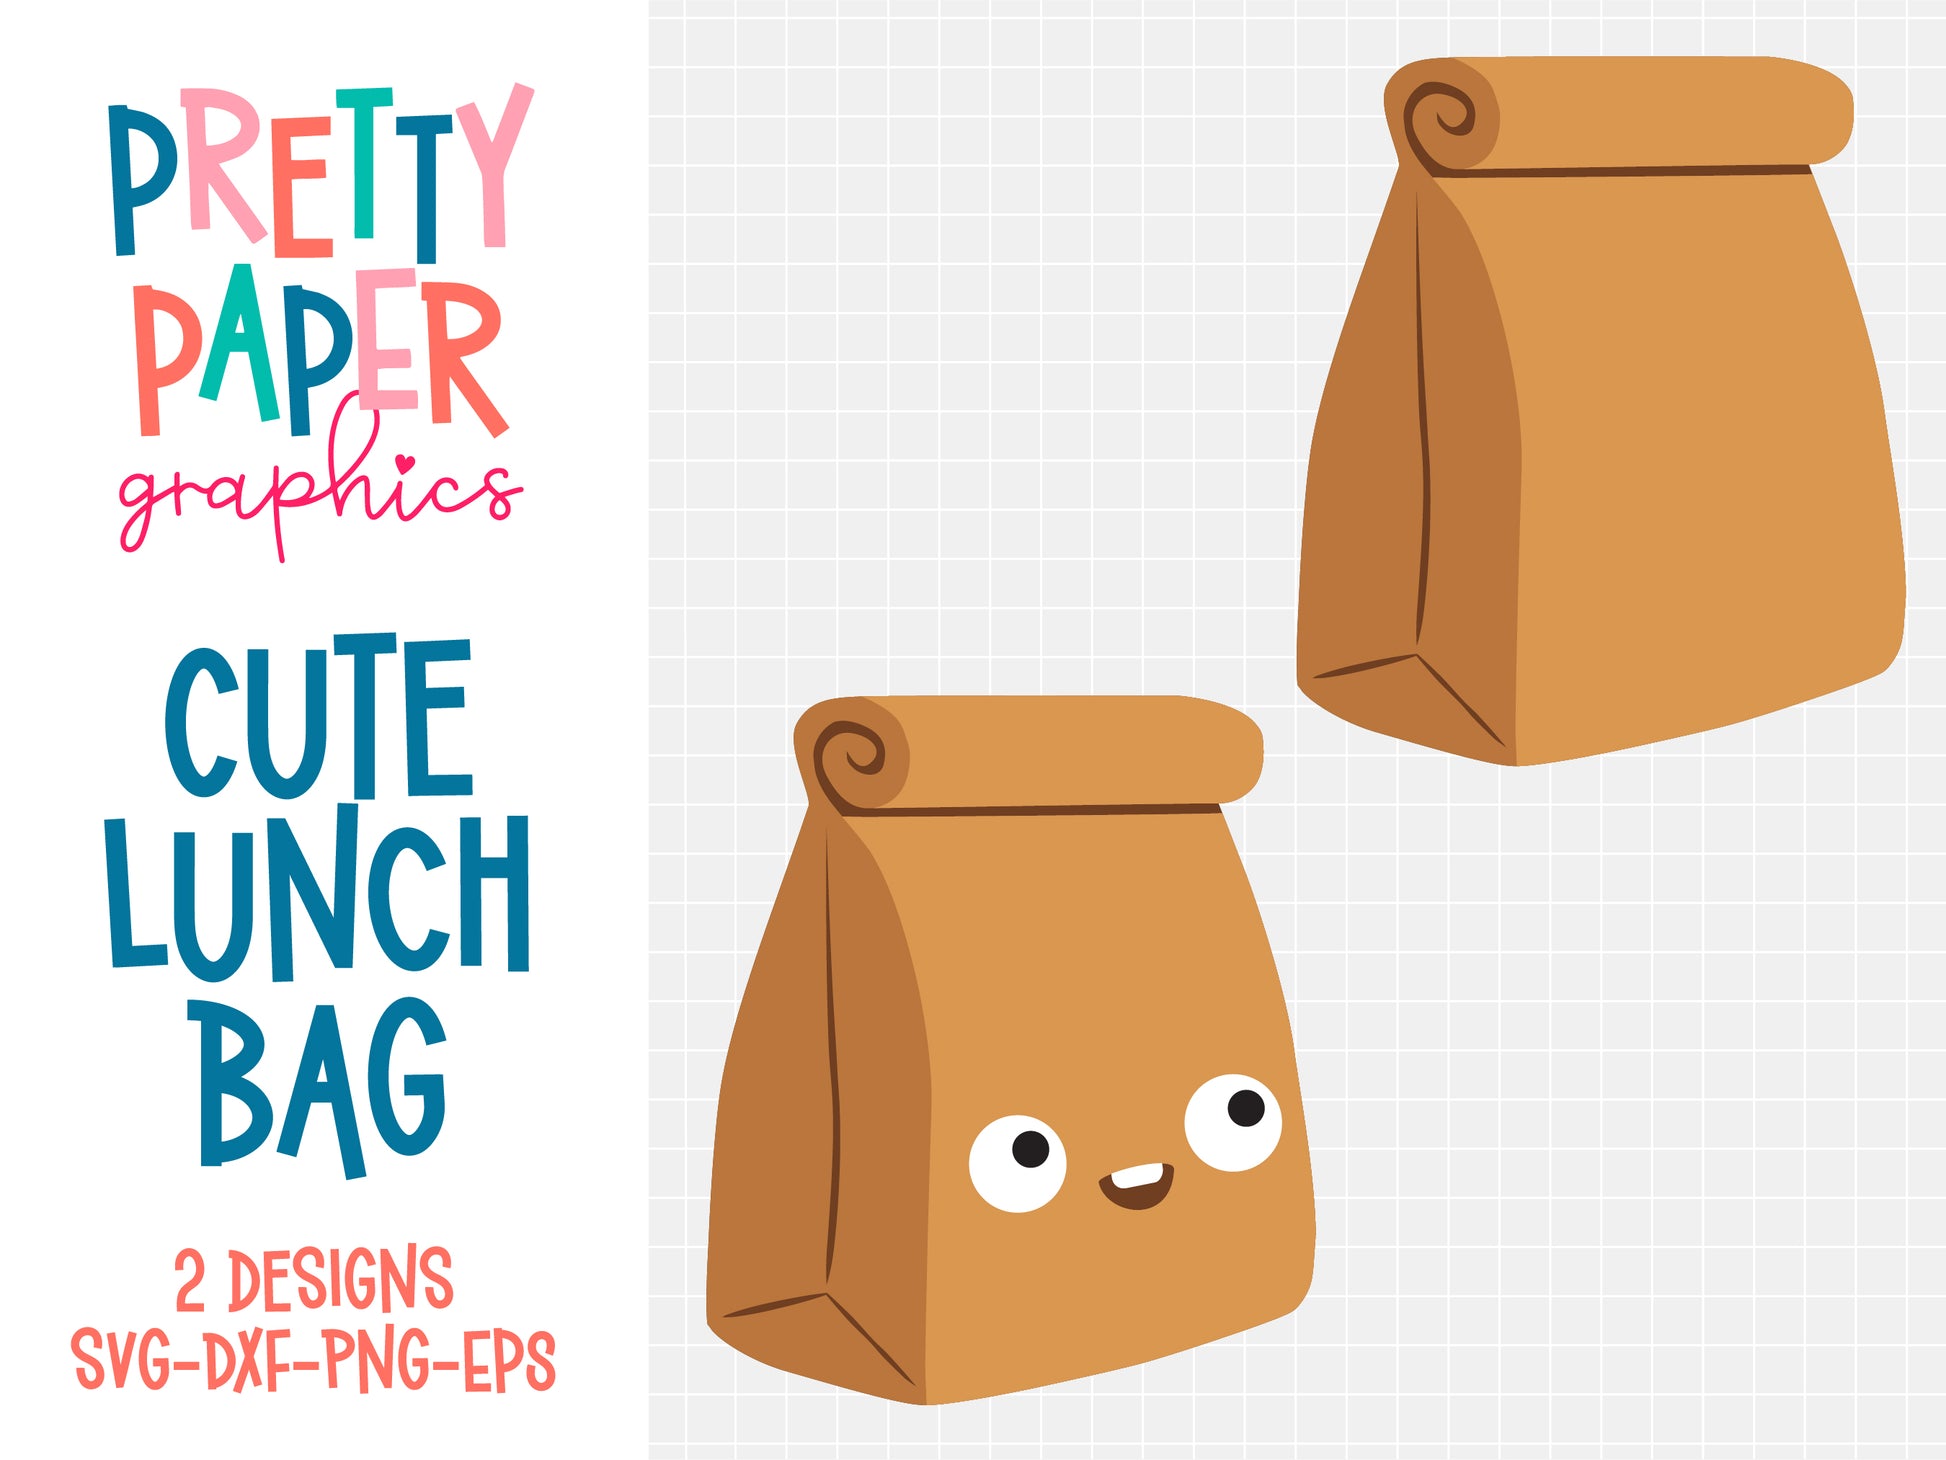 Cute Lunch Bag SVG Cut Files by Pretty Paper Graphics